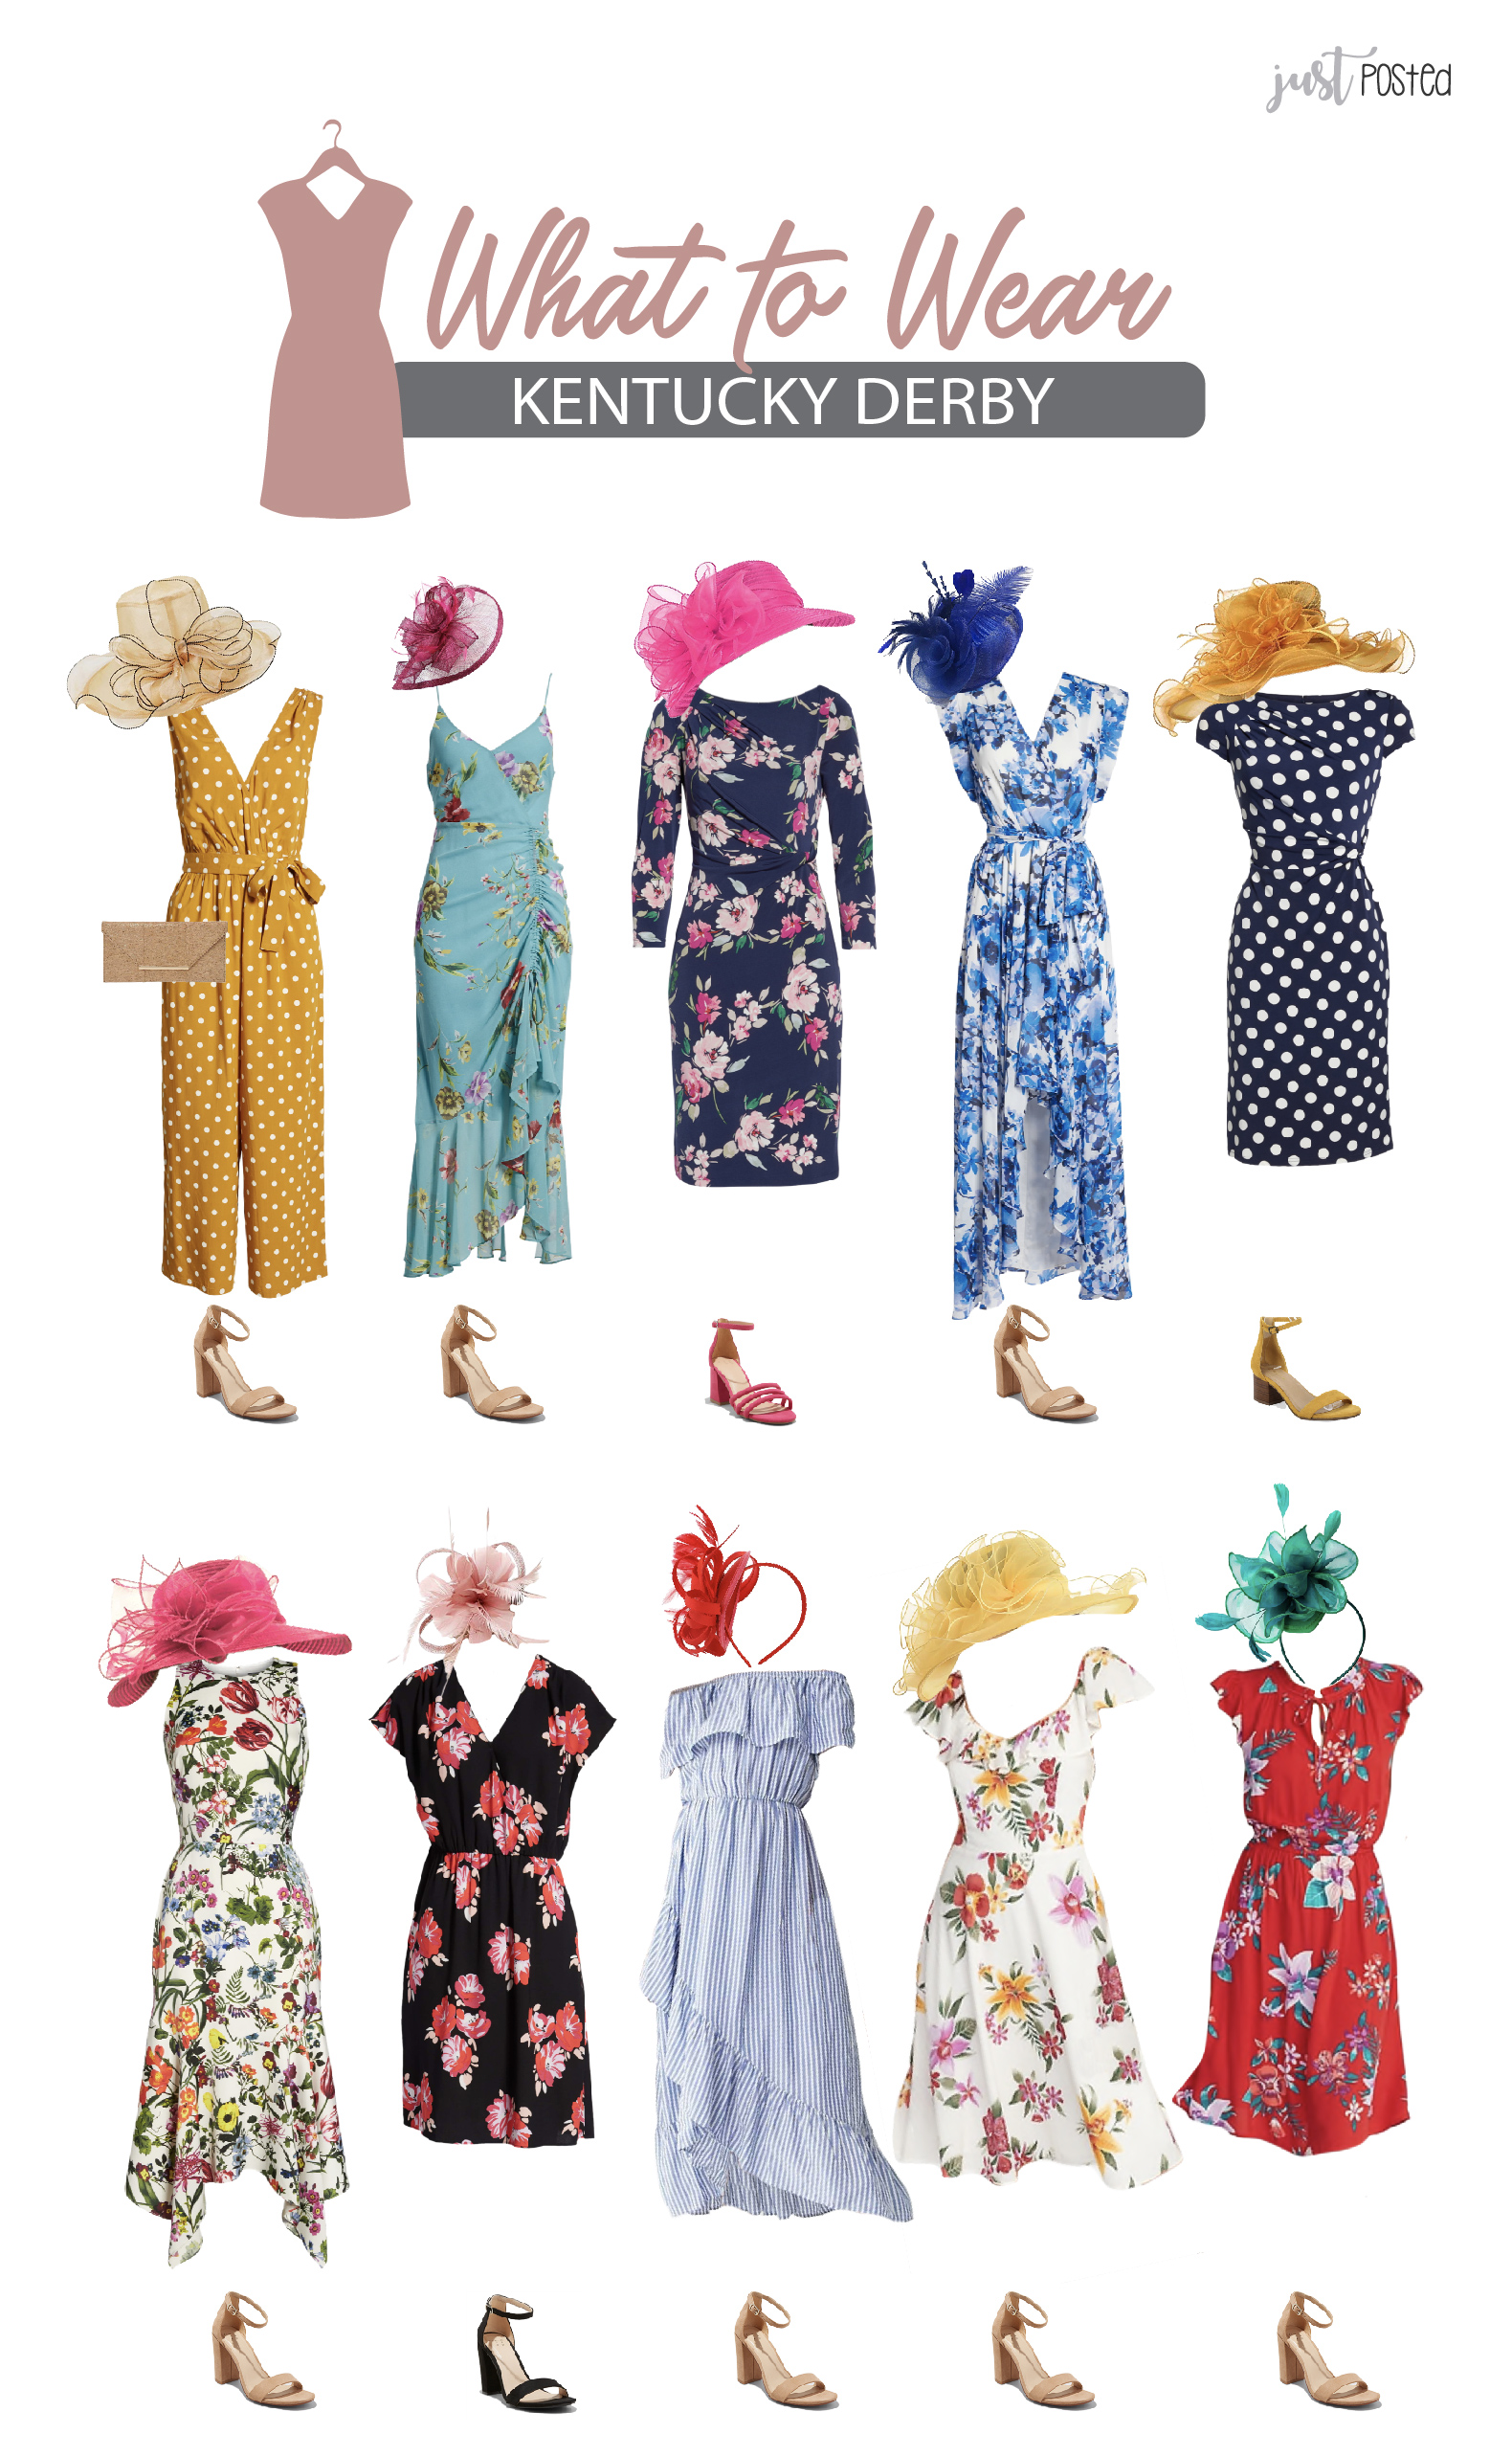 what-to-wear-kentucky-derby-just-posted